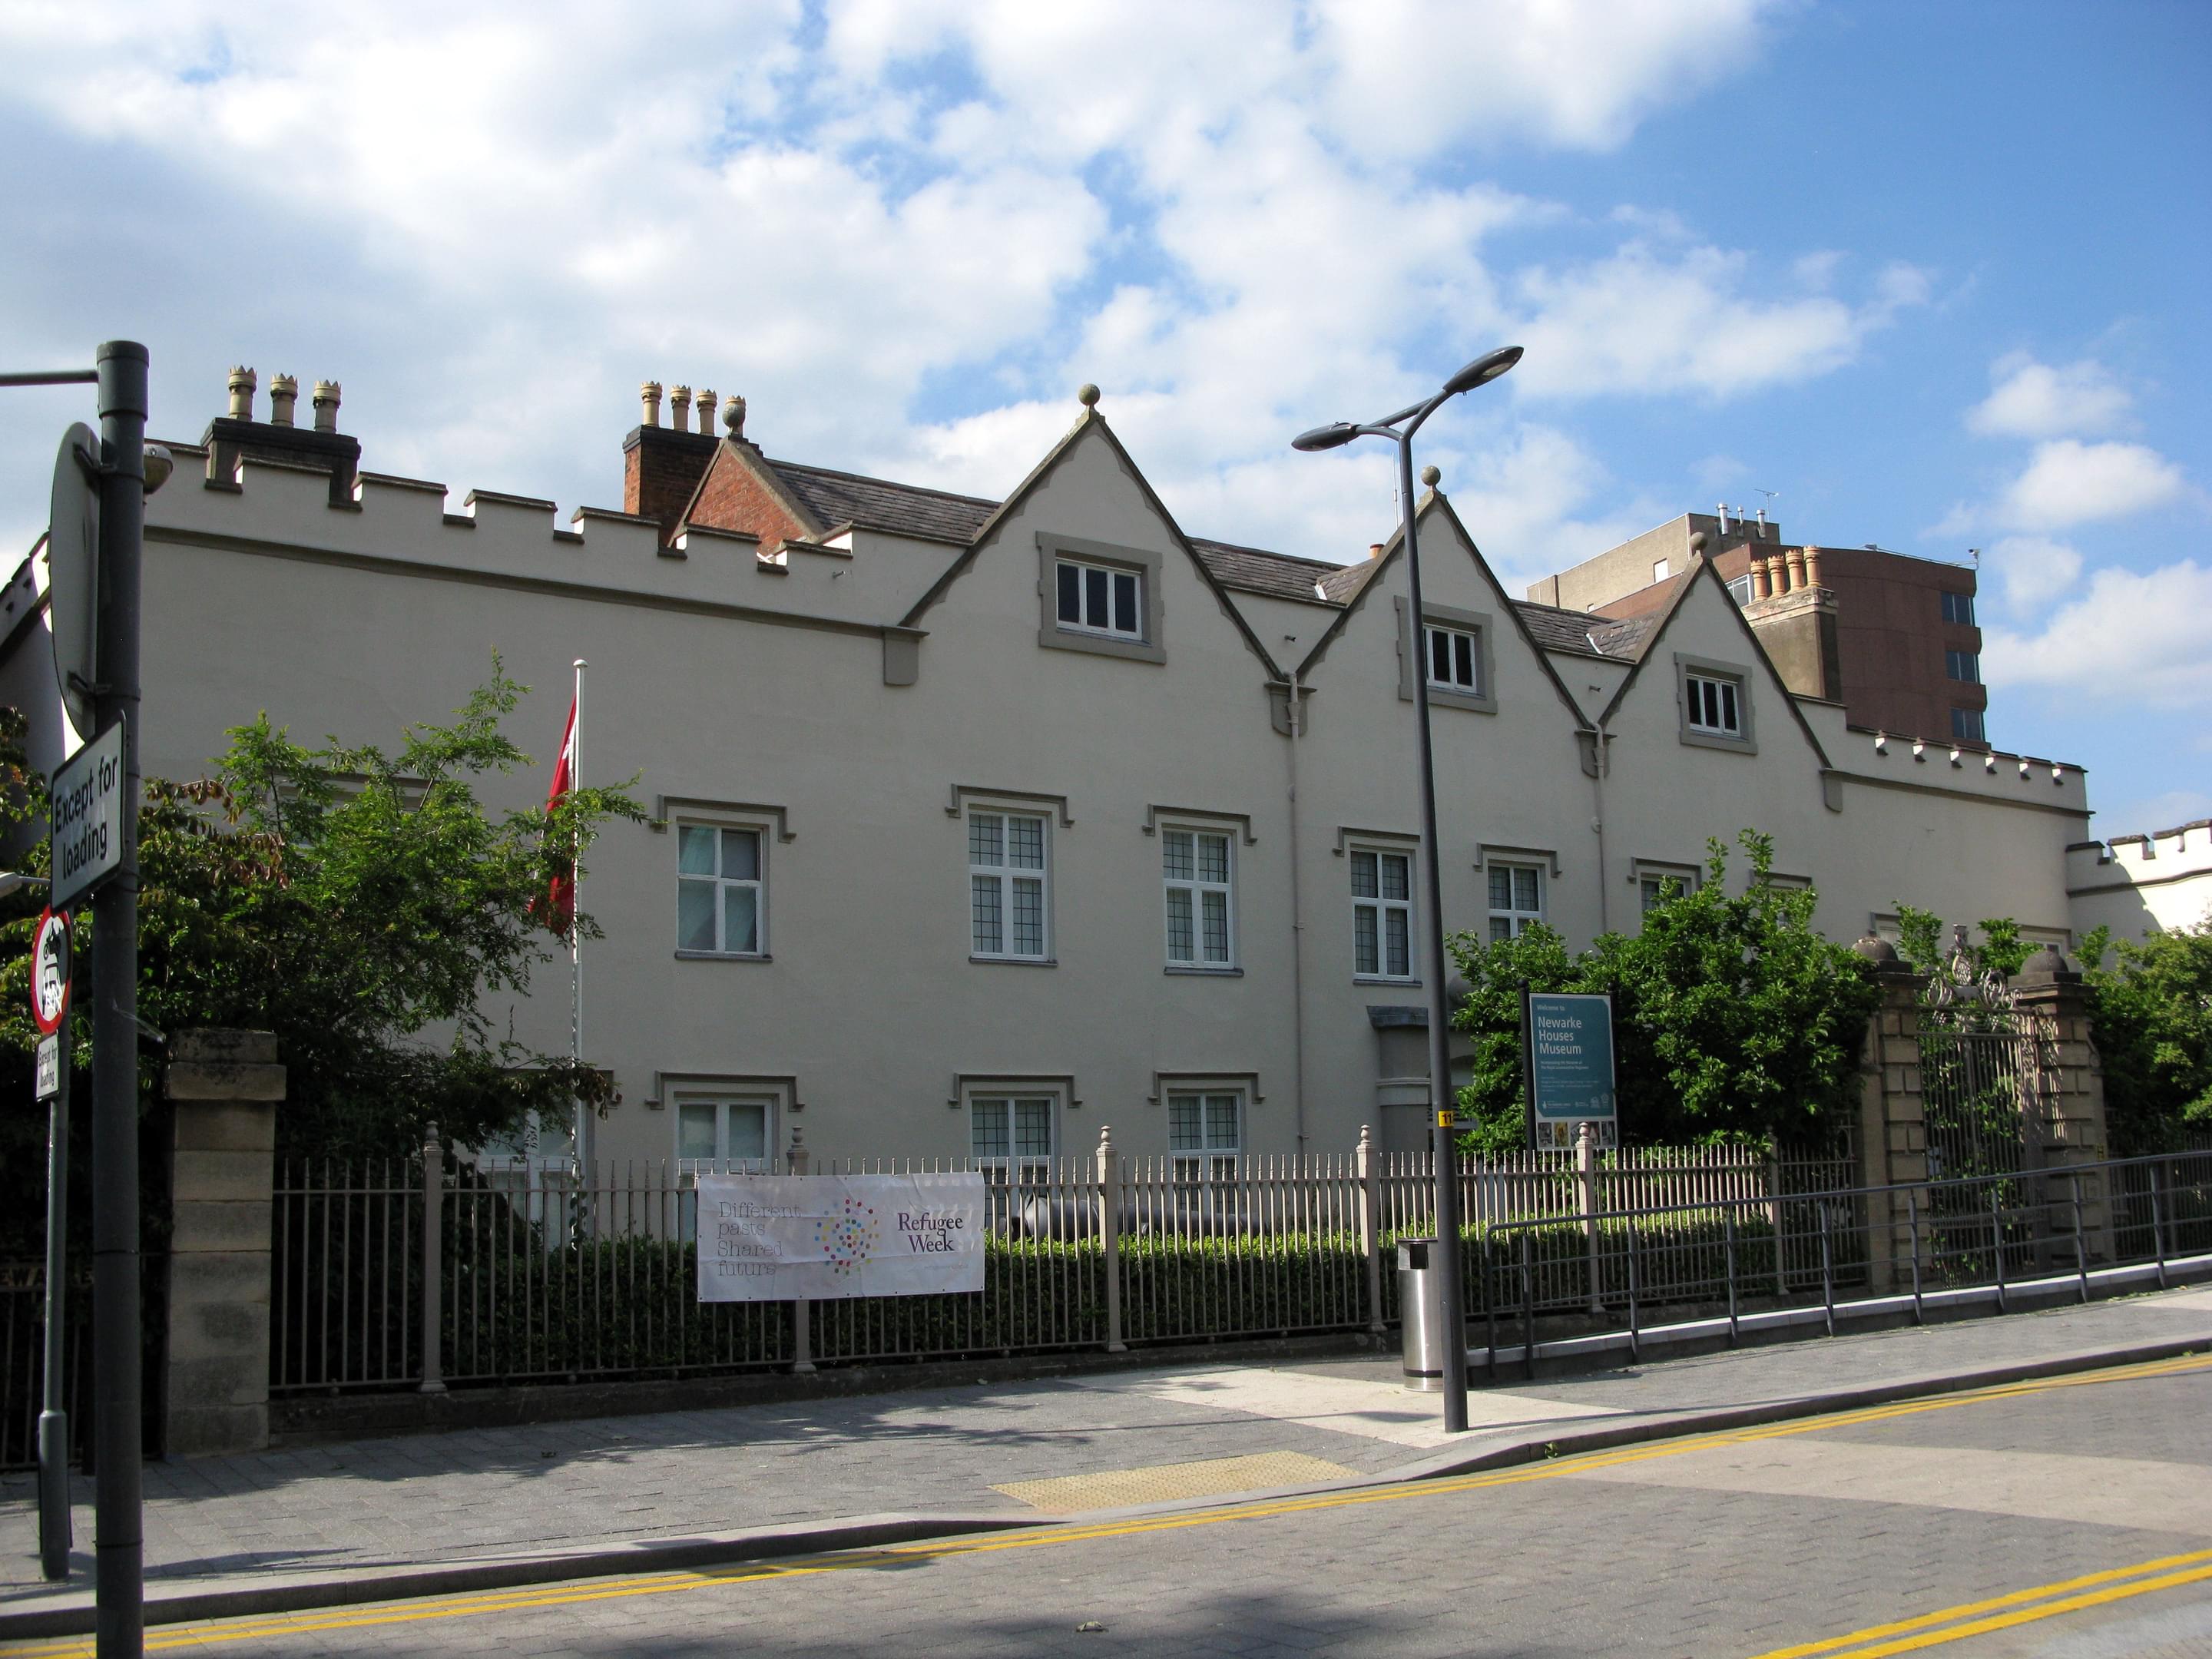 The Newarke Houses Museum Overview